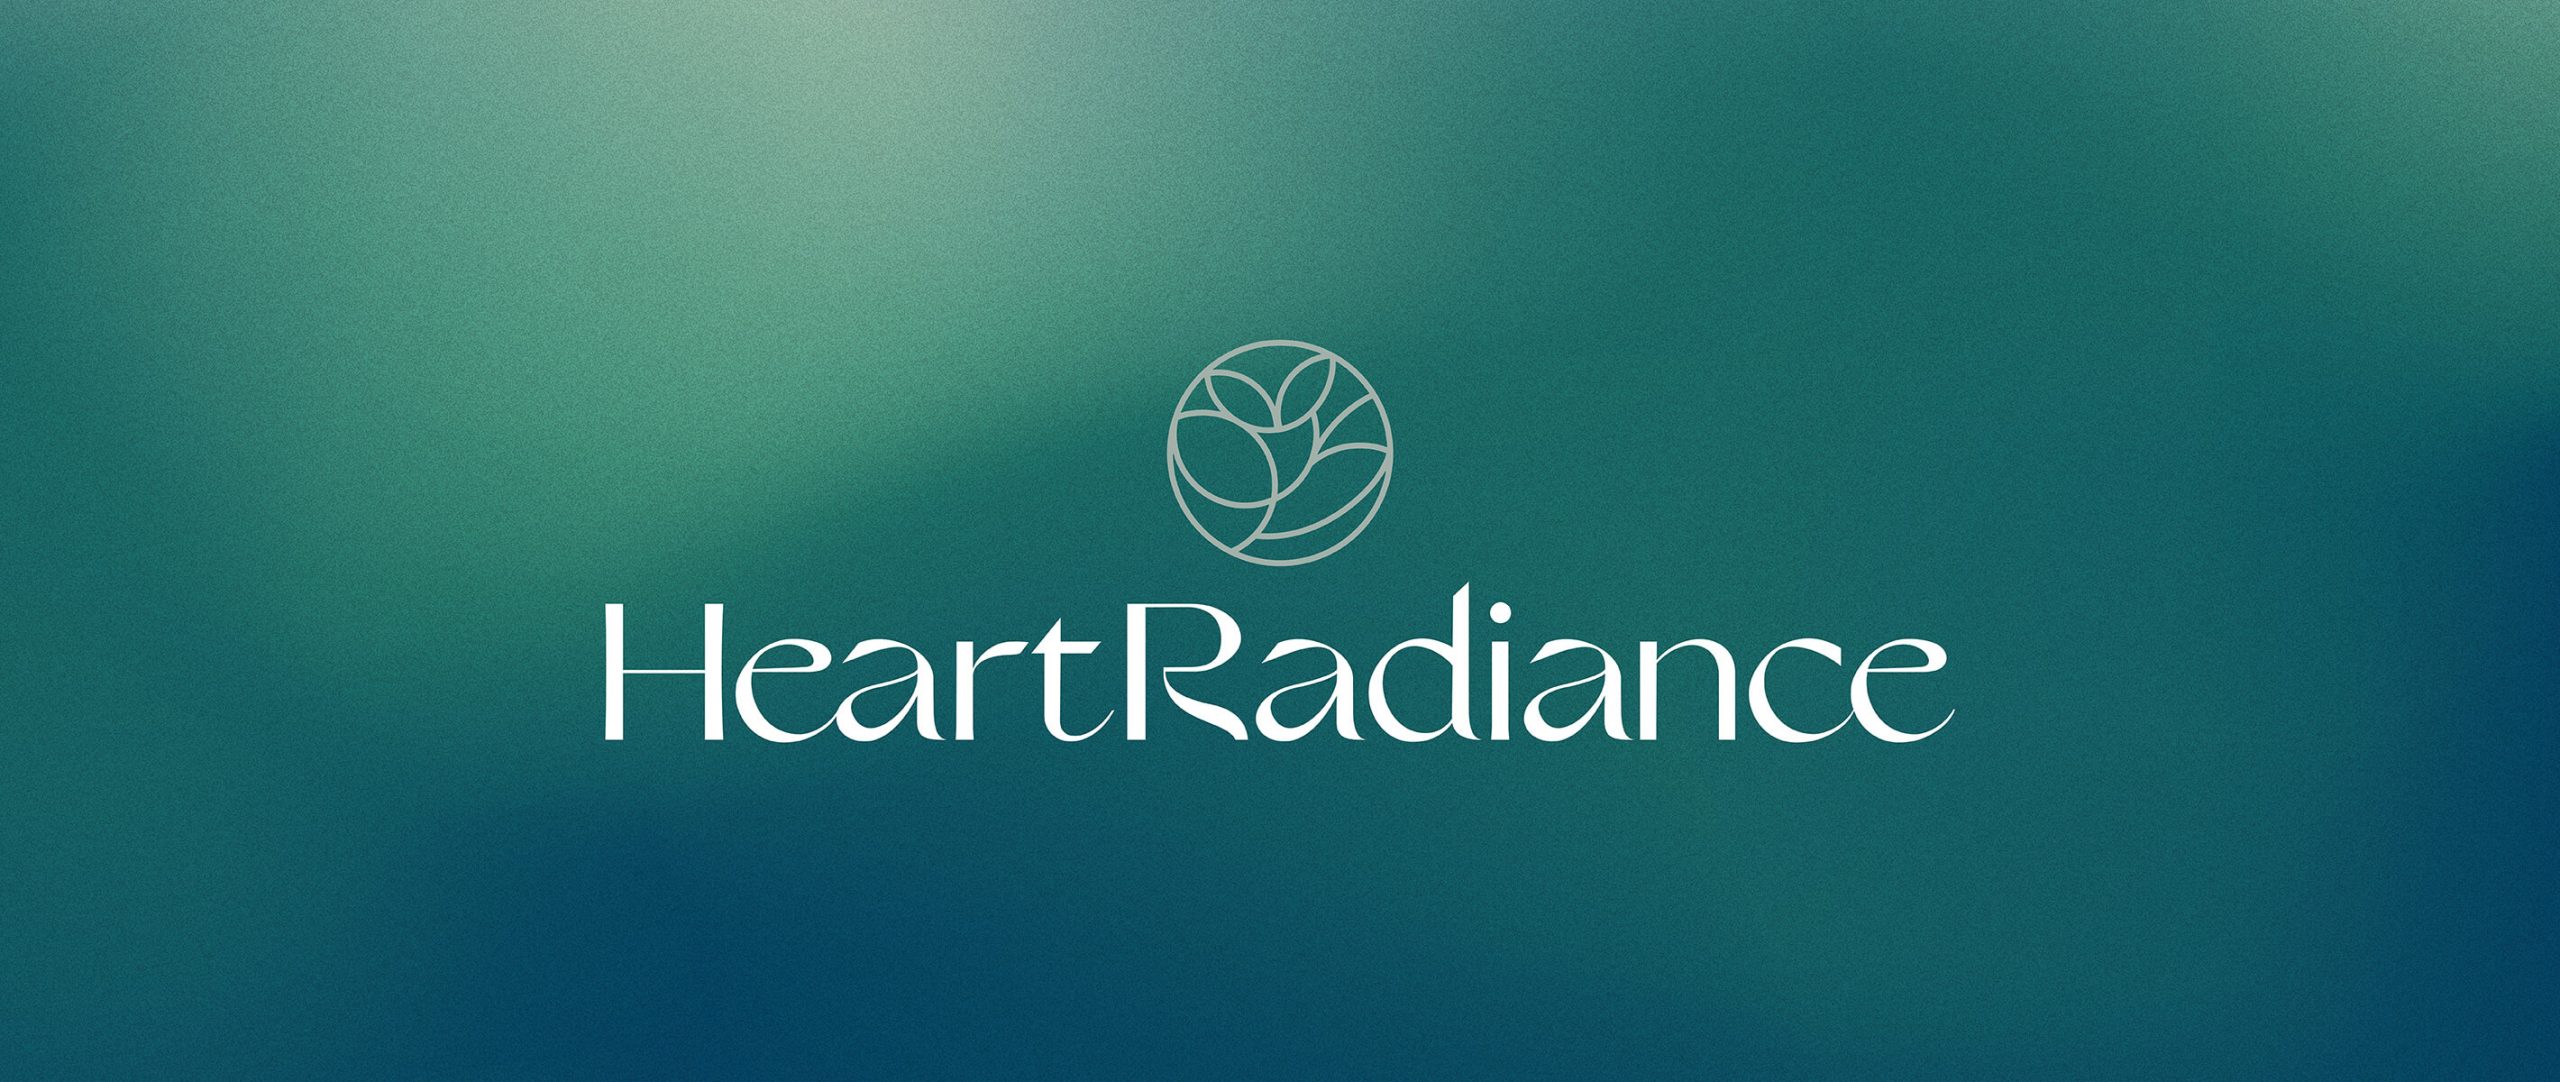 Brand design portfolio image of a green and blue hazy gradient with the HeartRadiance logo on top of it in cream. An elegant semi-serif typeface is used in the logotype while a floral-esque circle icon appears in green above.